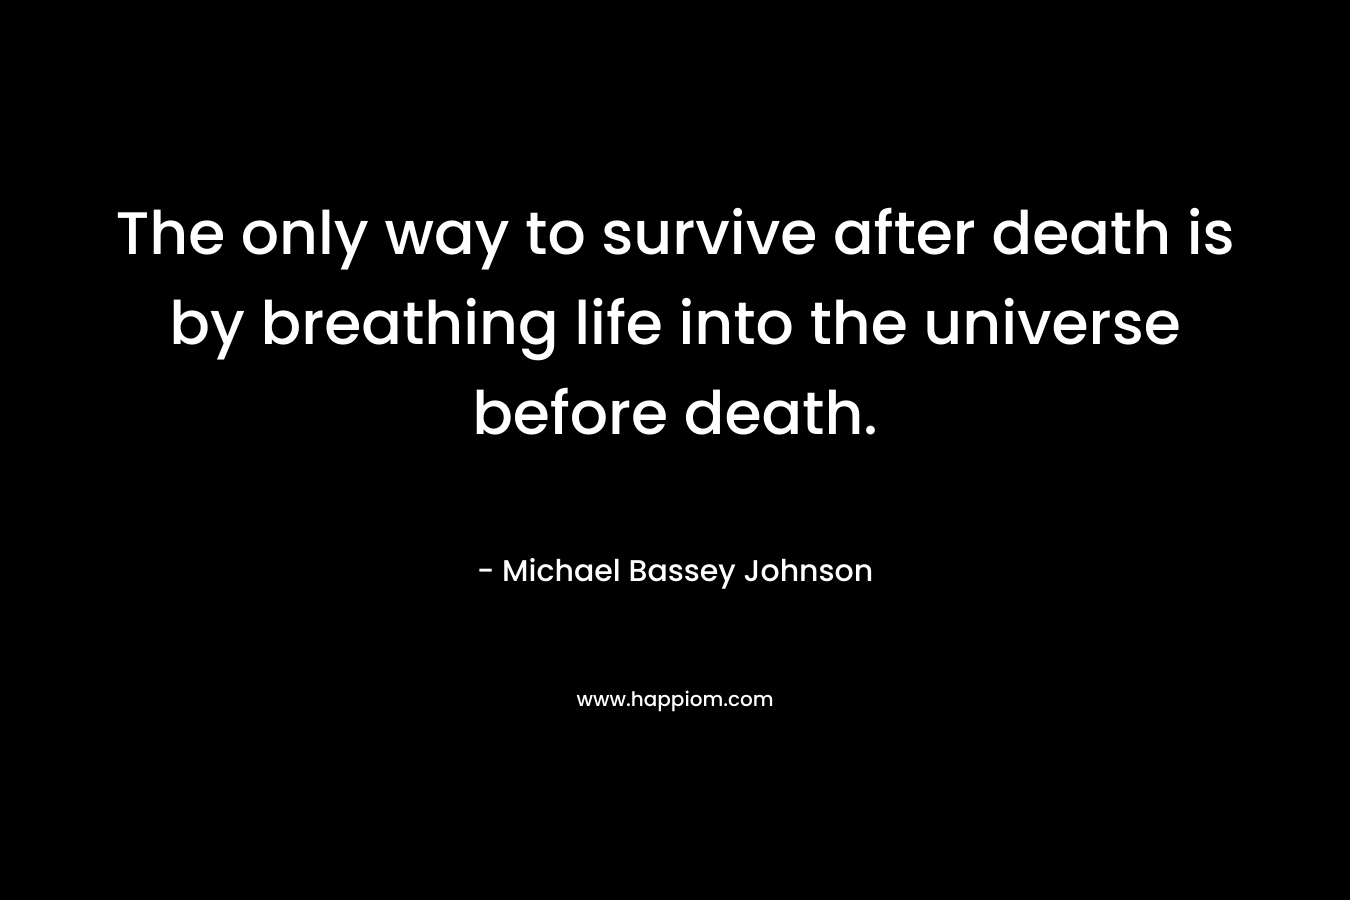 The only way to survive after death is by breathing life into the universe before death.